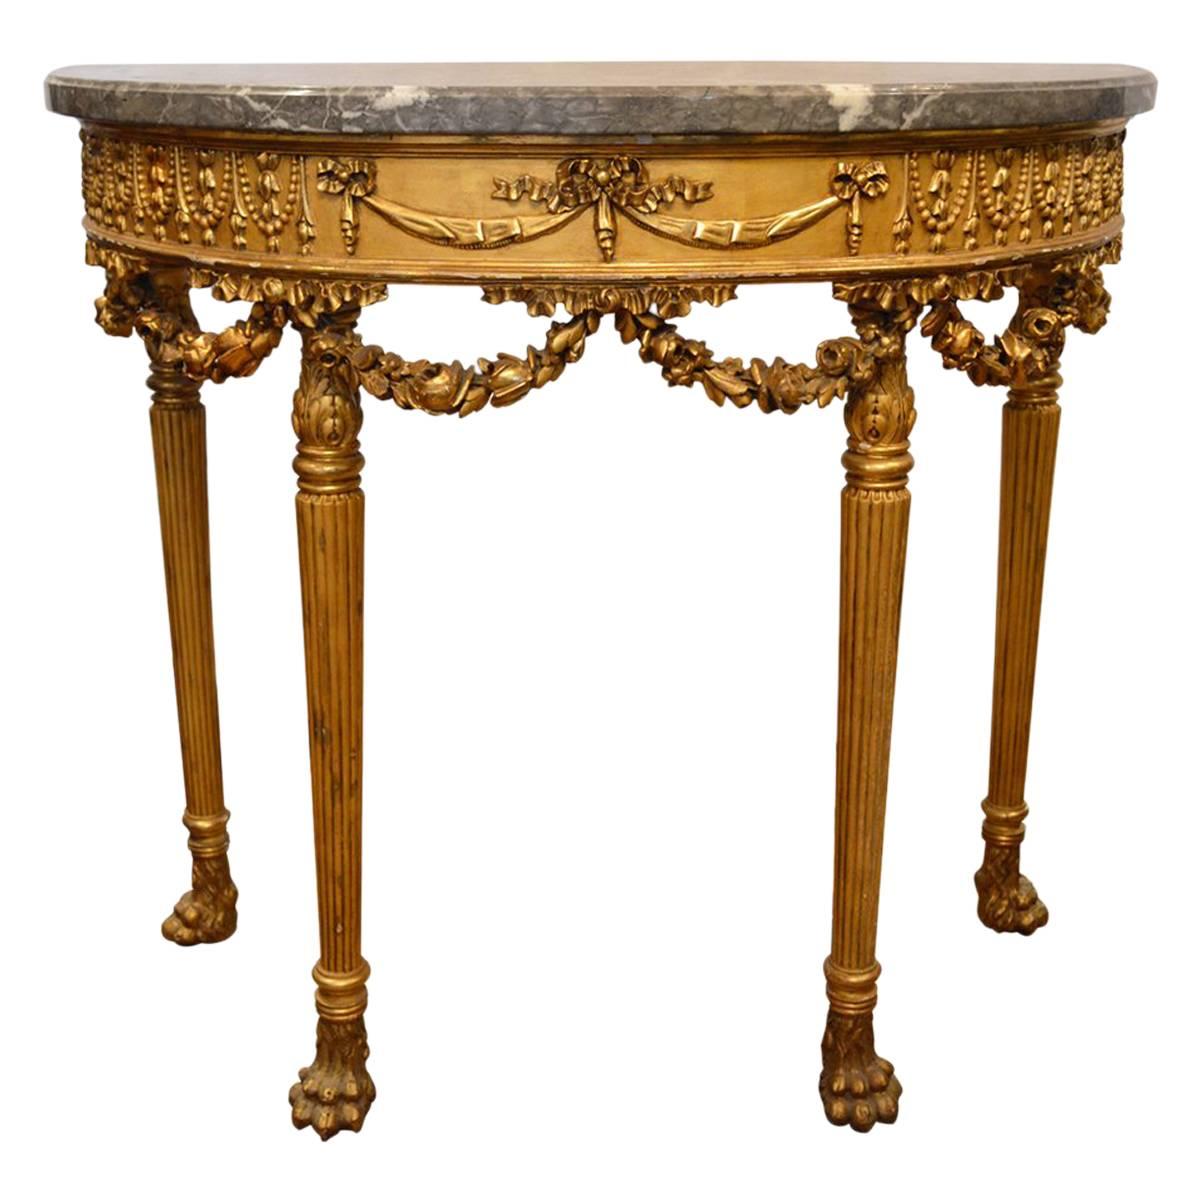 Antique French Louis XIV Gilt Console with Marble Top